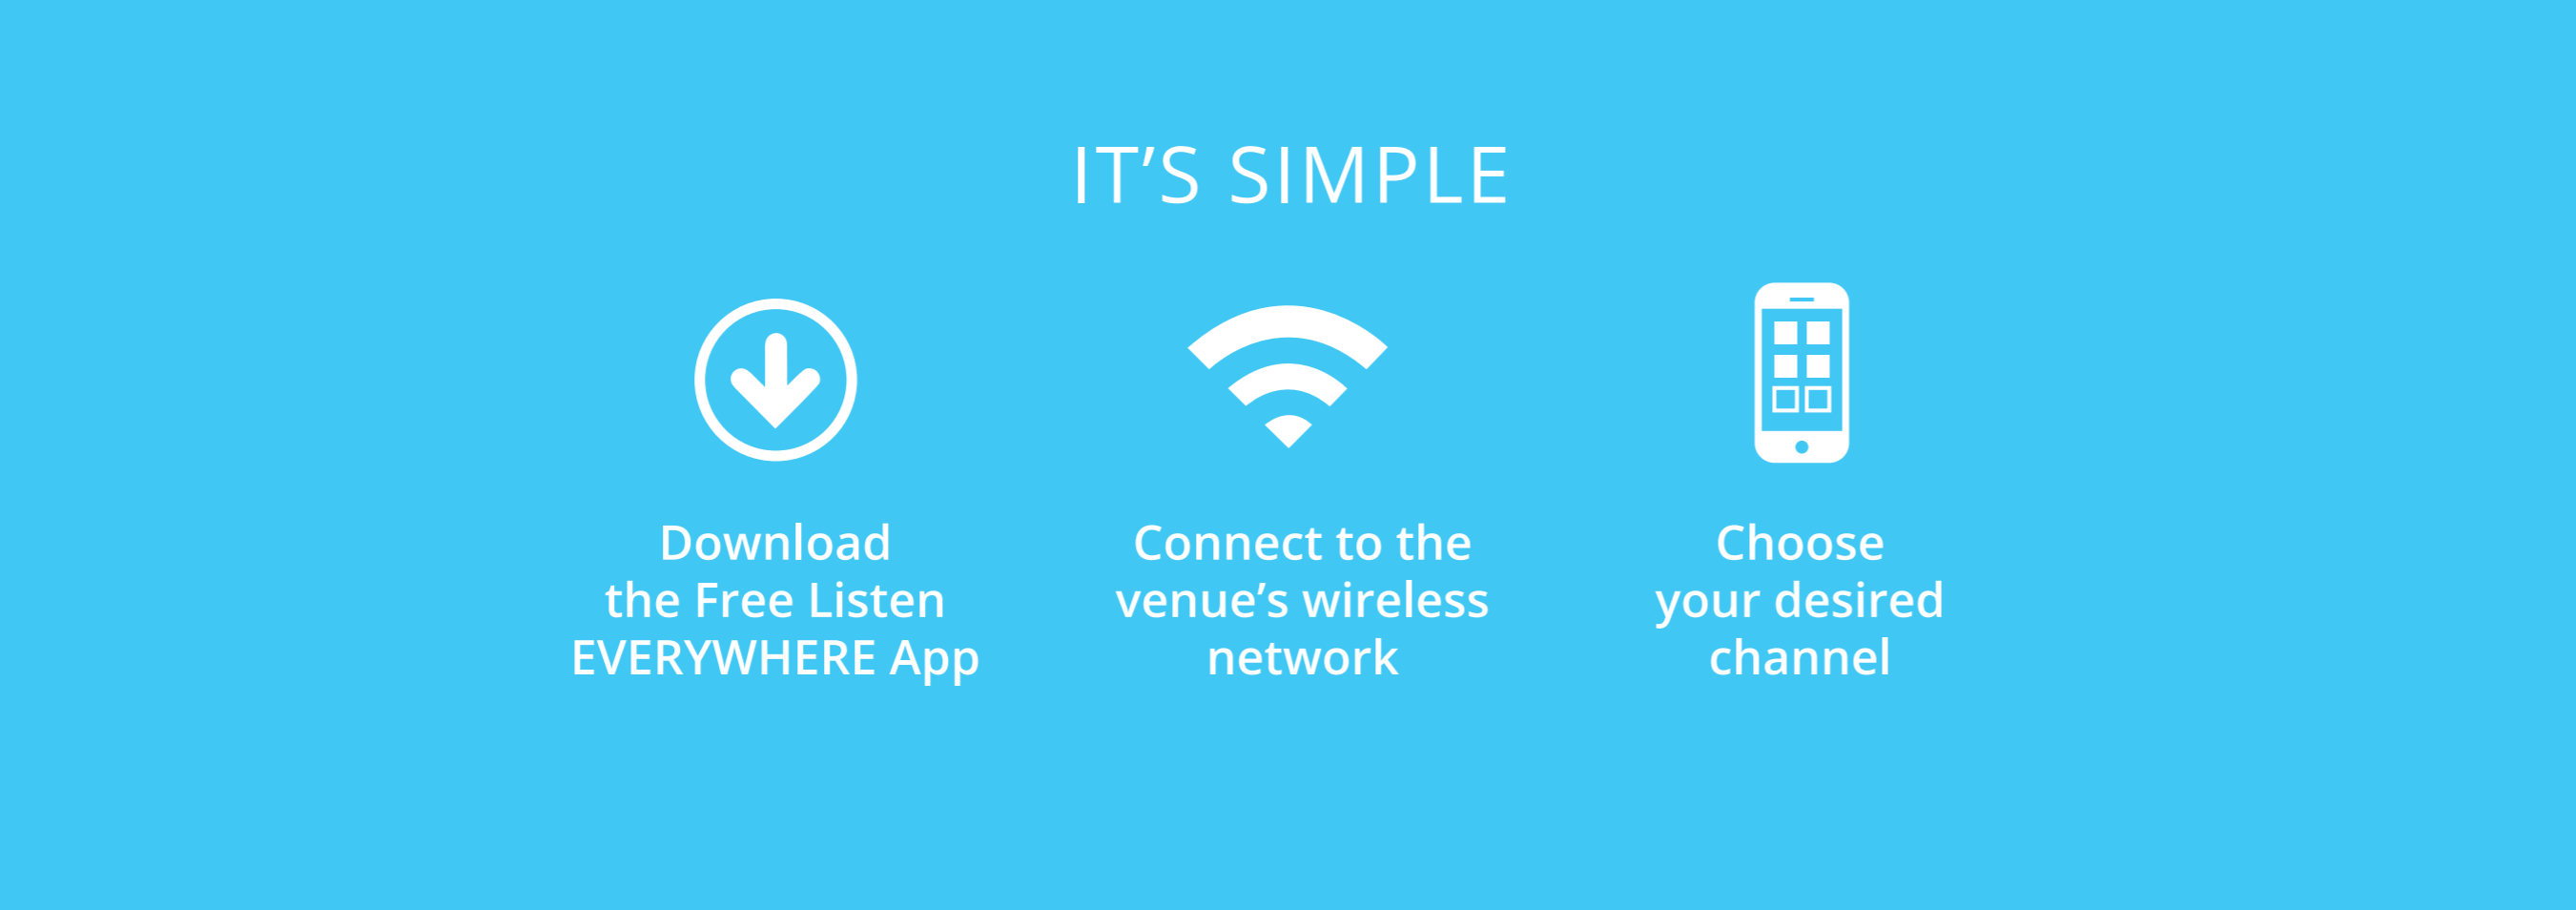 Graphic representing three steps: download, connect, select